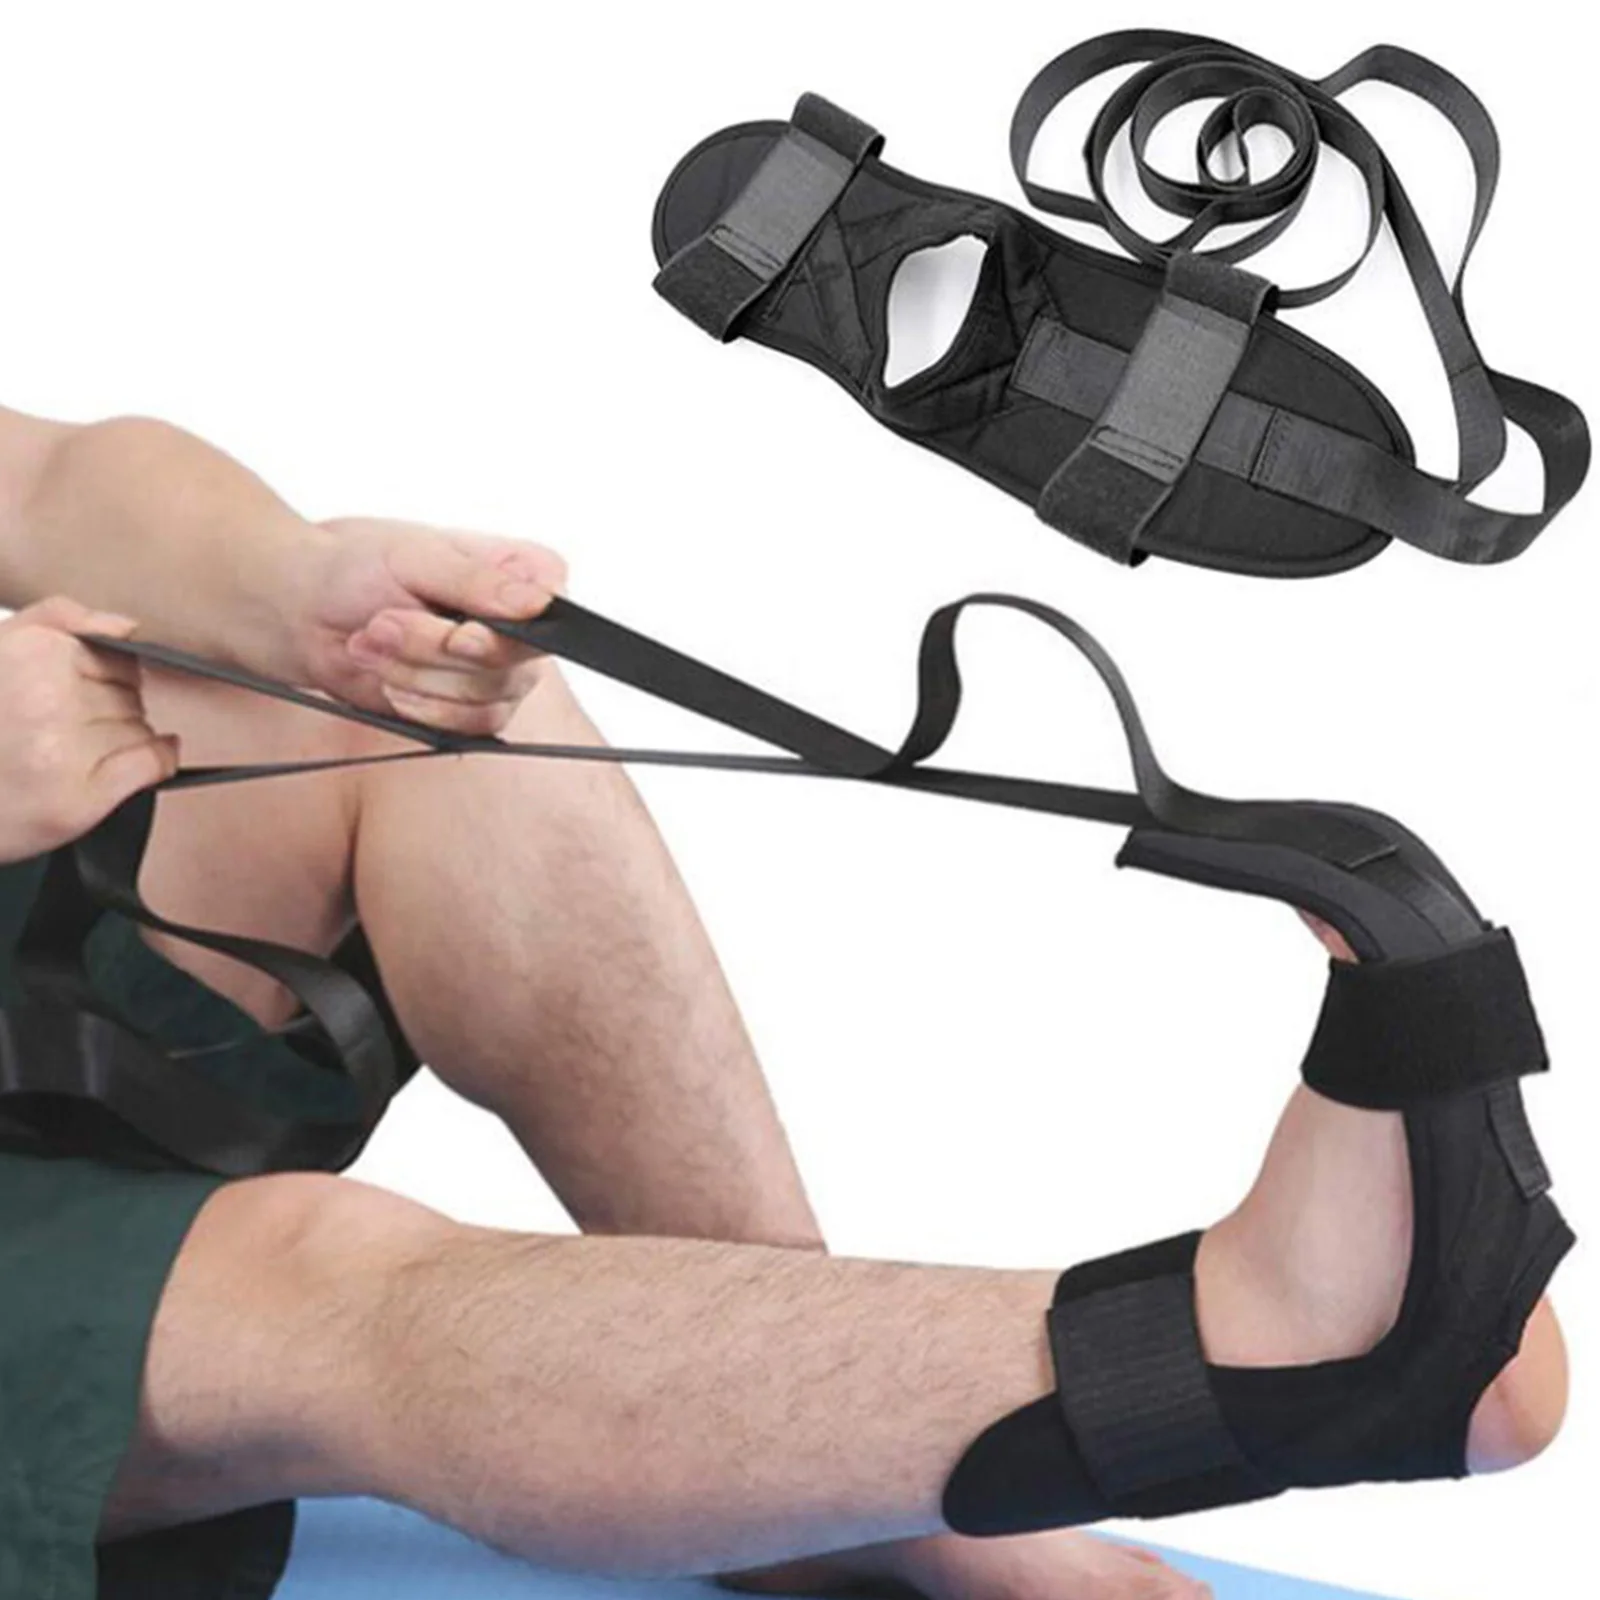 Stretching Strap Yoga with Foot Stretcher for Stretch.Yoga Stretch Strap for